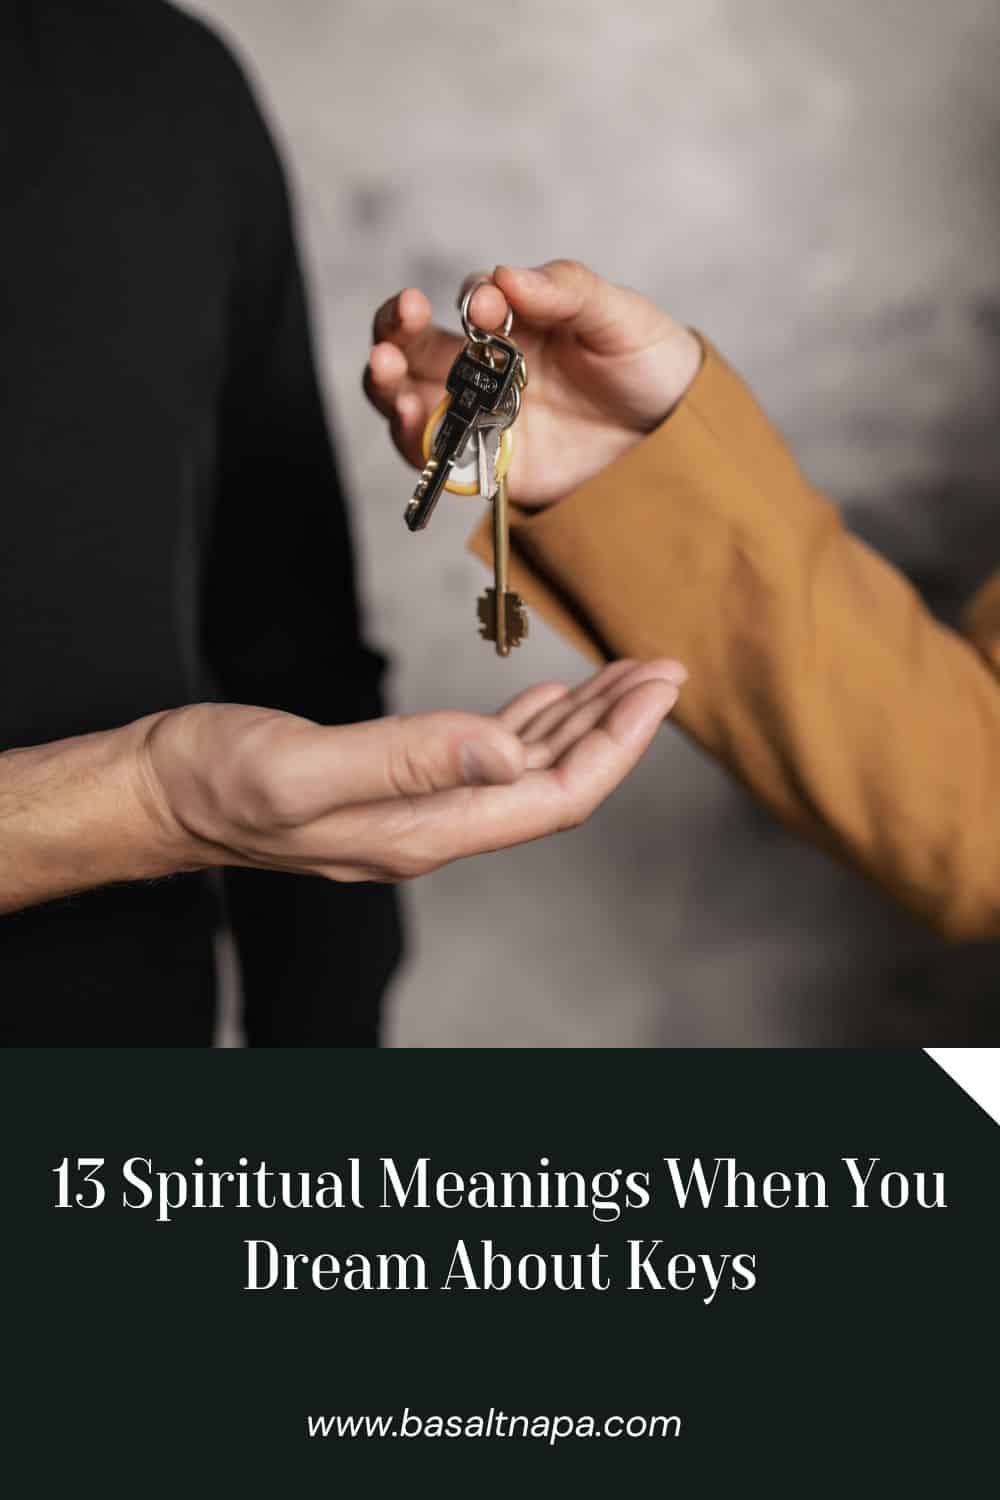 13 Spiritual Meanings When You Dream About Keys